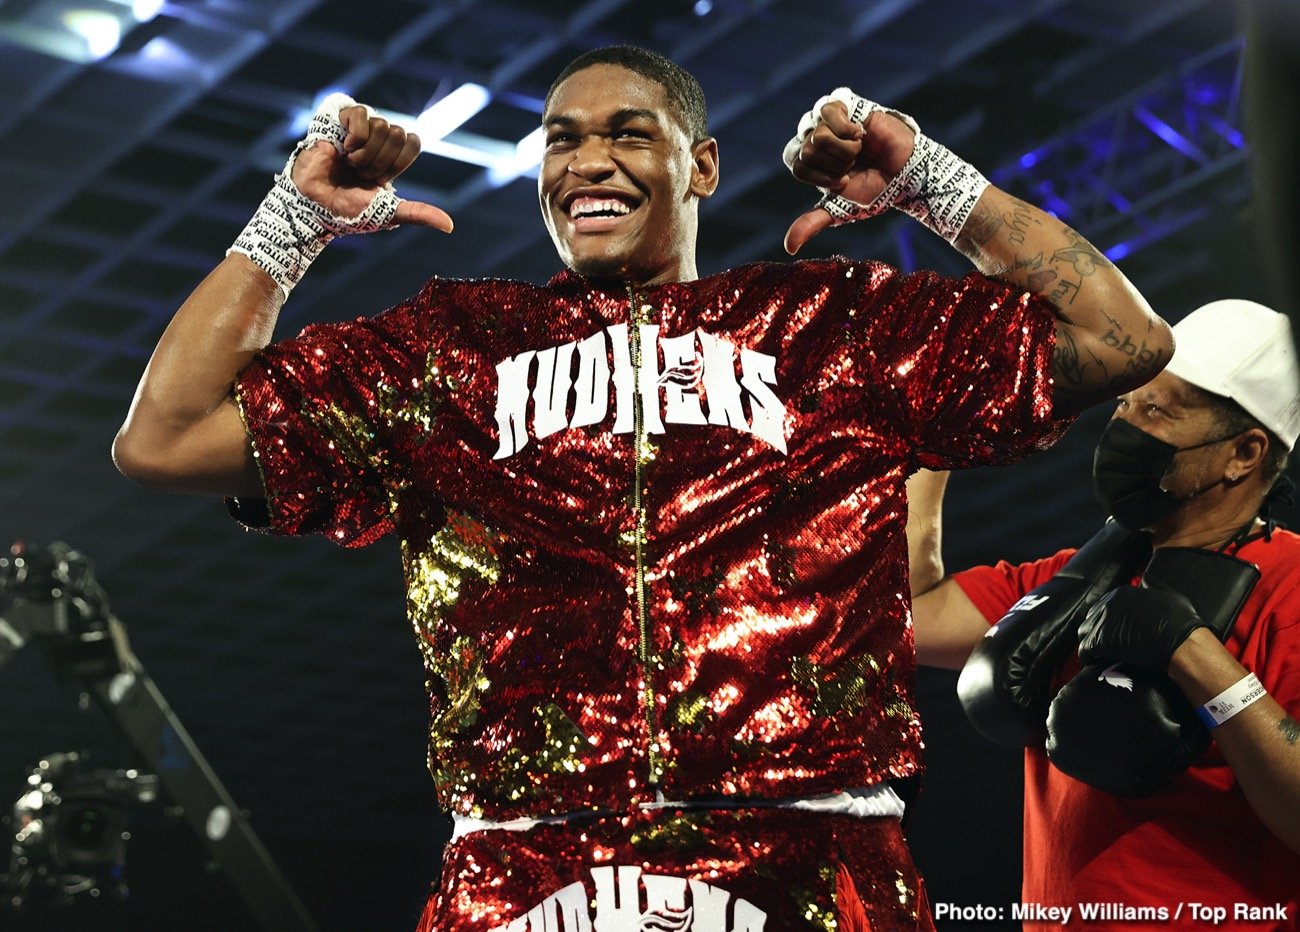 RESULTS: Felix Verdejo destroys Will Madera in 1st round knockout